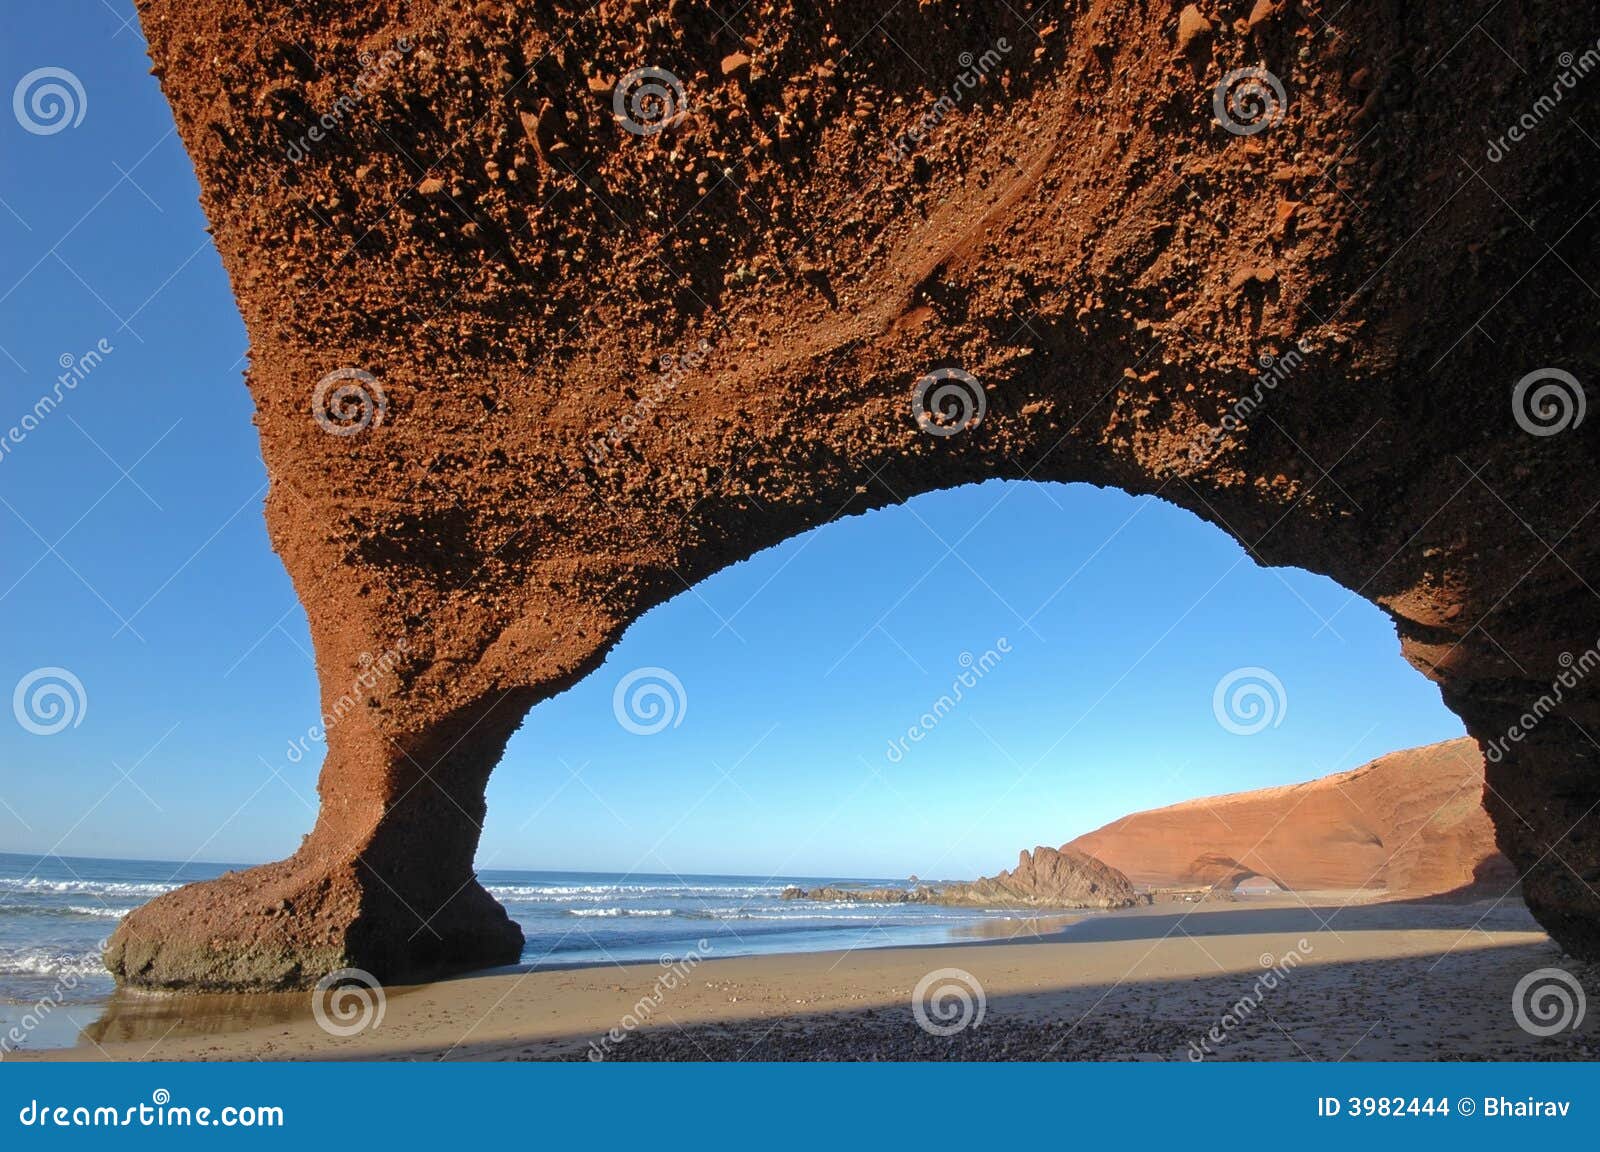 natural arch rock formation.